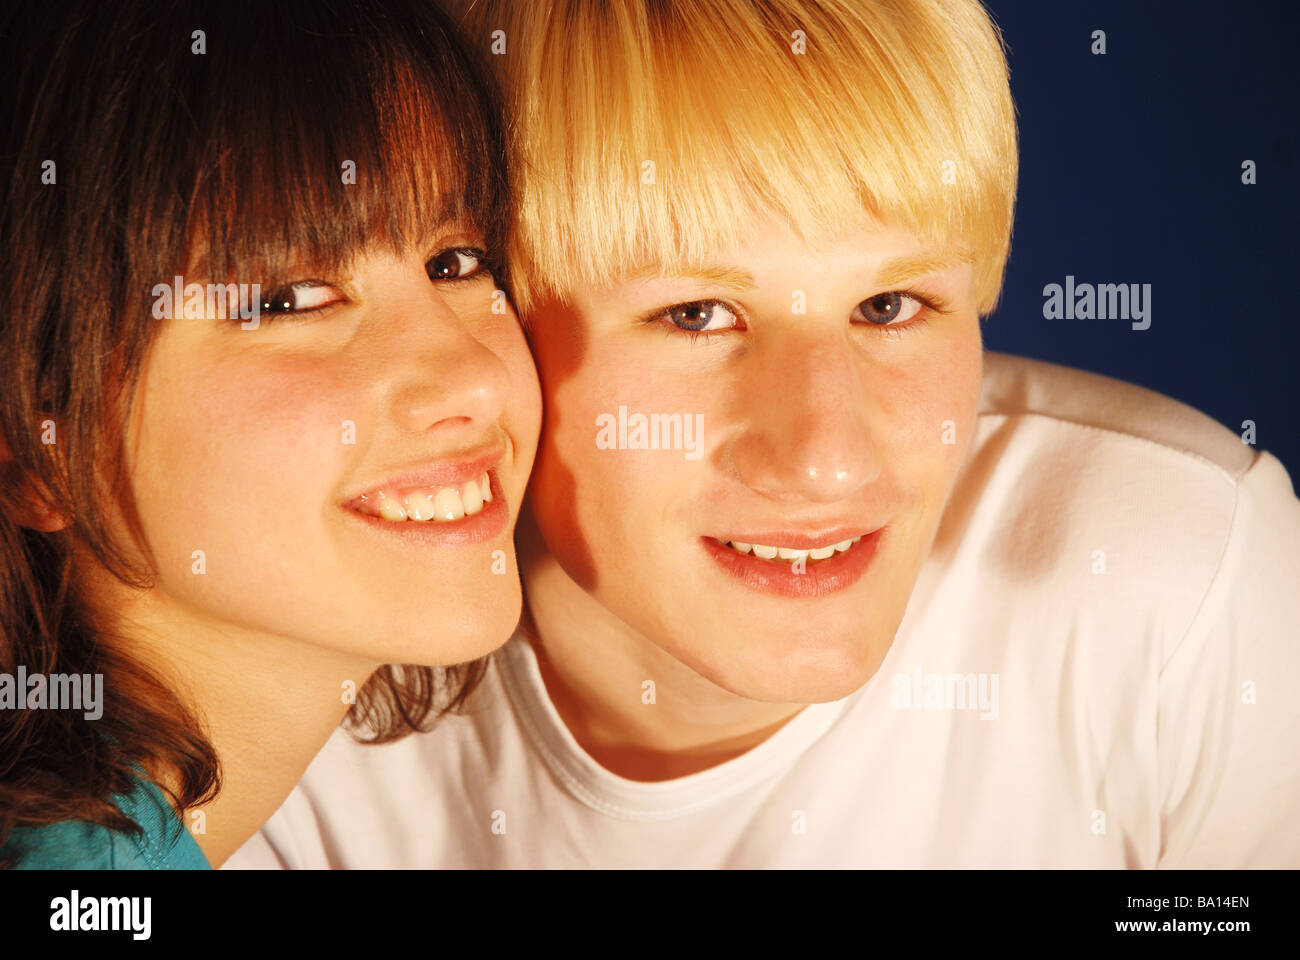 Portrait of young couple smiling and looking at the camera. Stock Photo